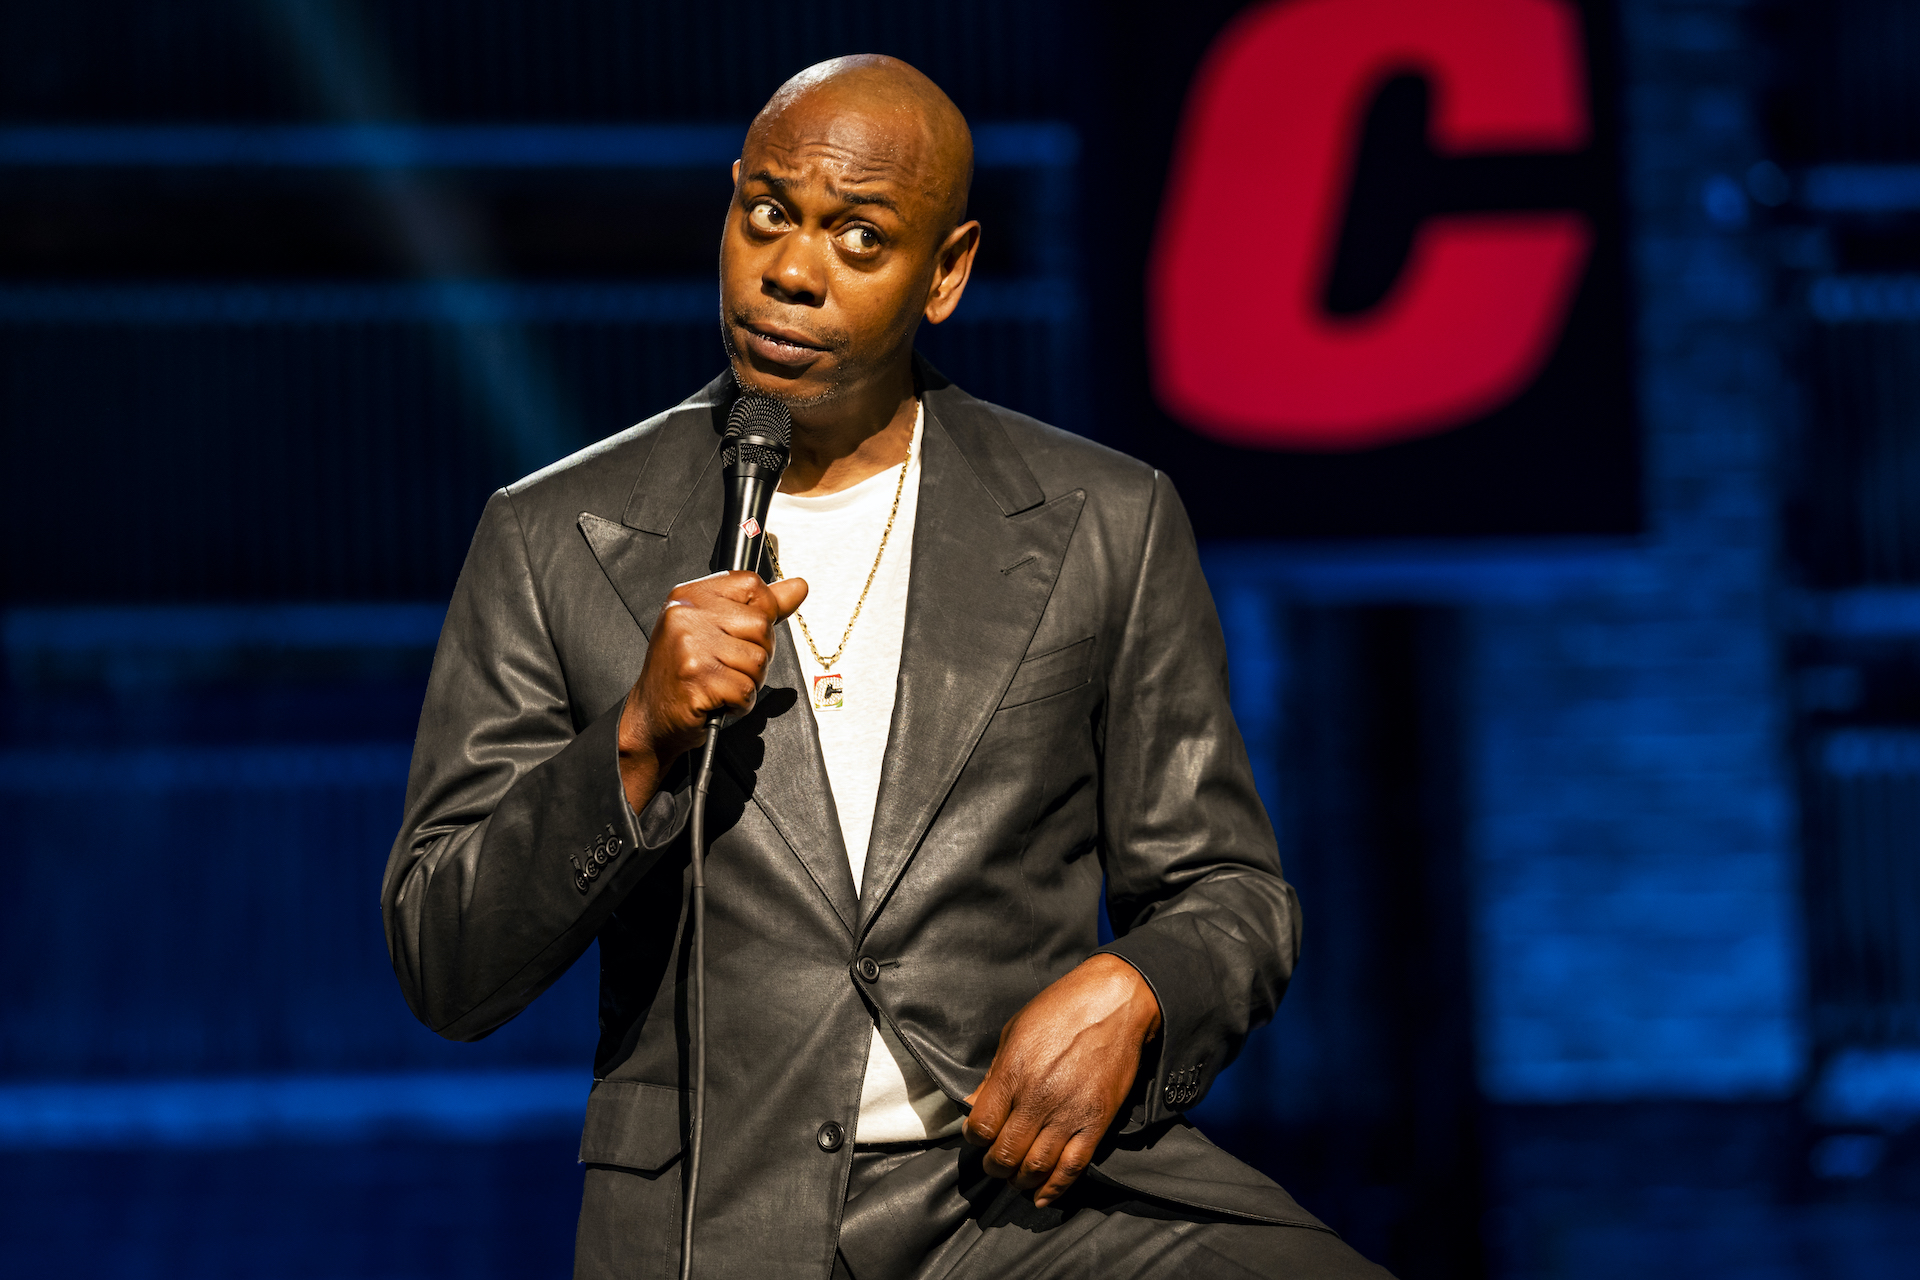 Dave Chappelle surprised his audience by bringing out Elon Musk during his show Sunday night at the Chase Center. It is safe to say that the crowd was not pleased with his appearance.